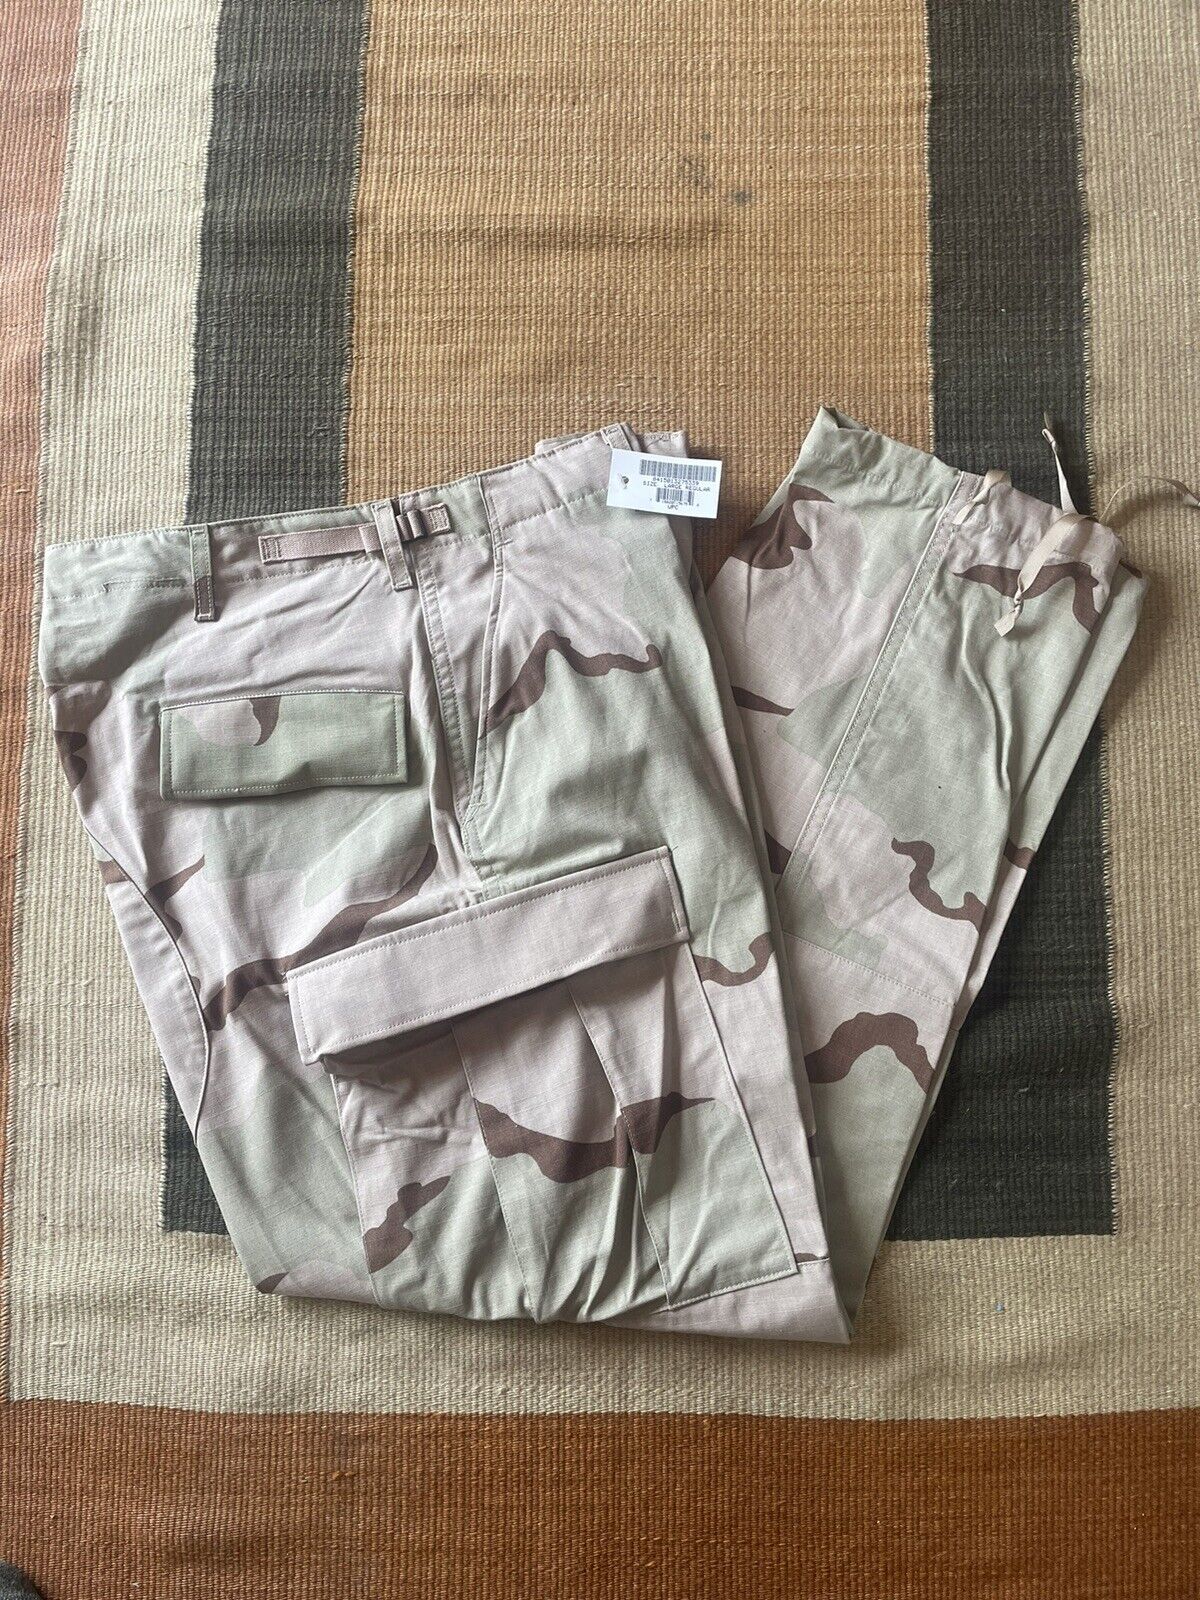 US military 3 color Desert Camouflage Combat Trousers pants NEW Large Regular